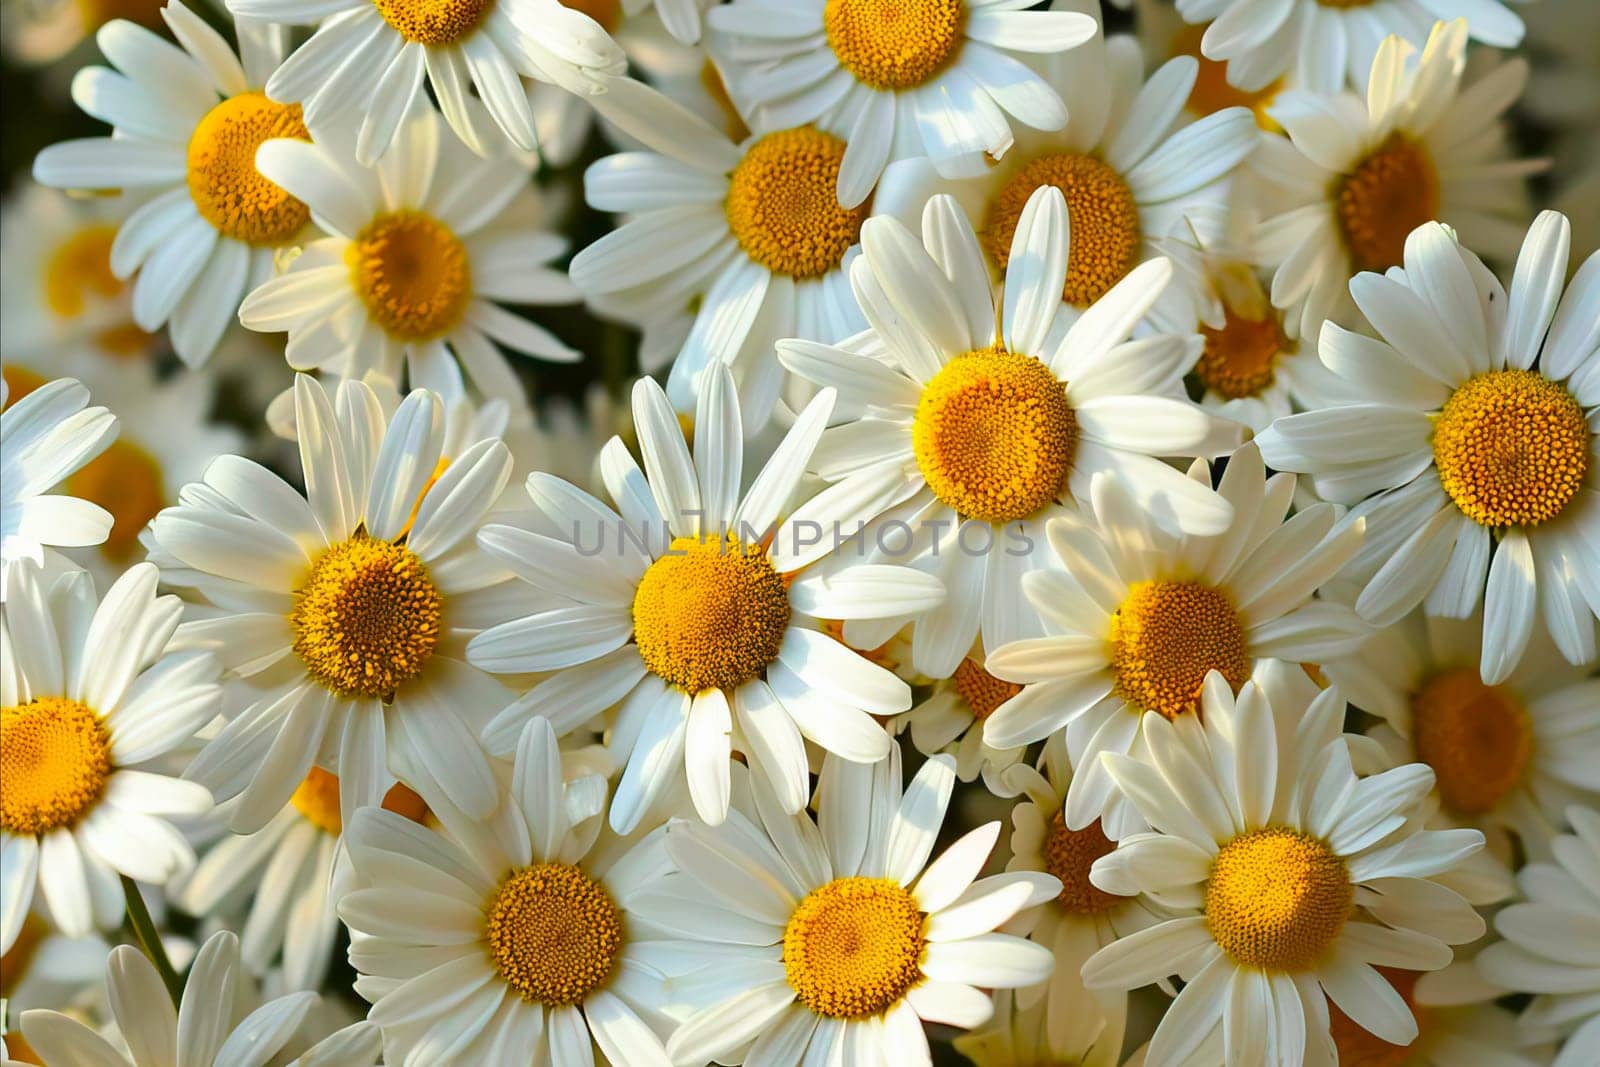 A Close Up of White Daisies Flowers